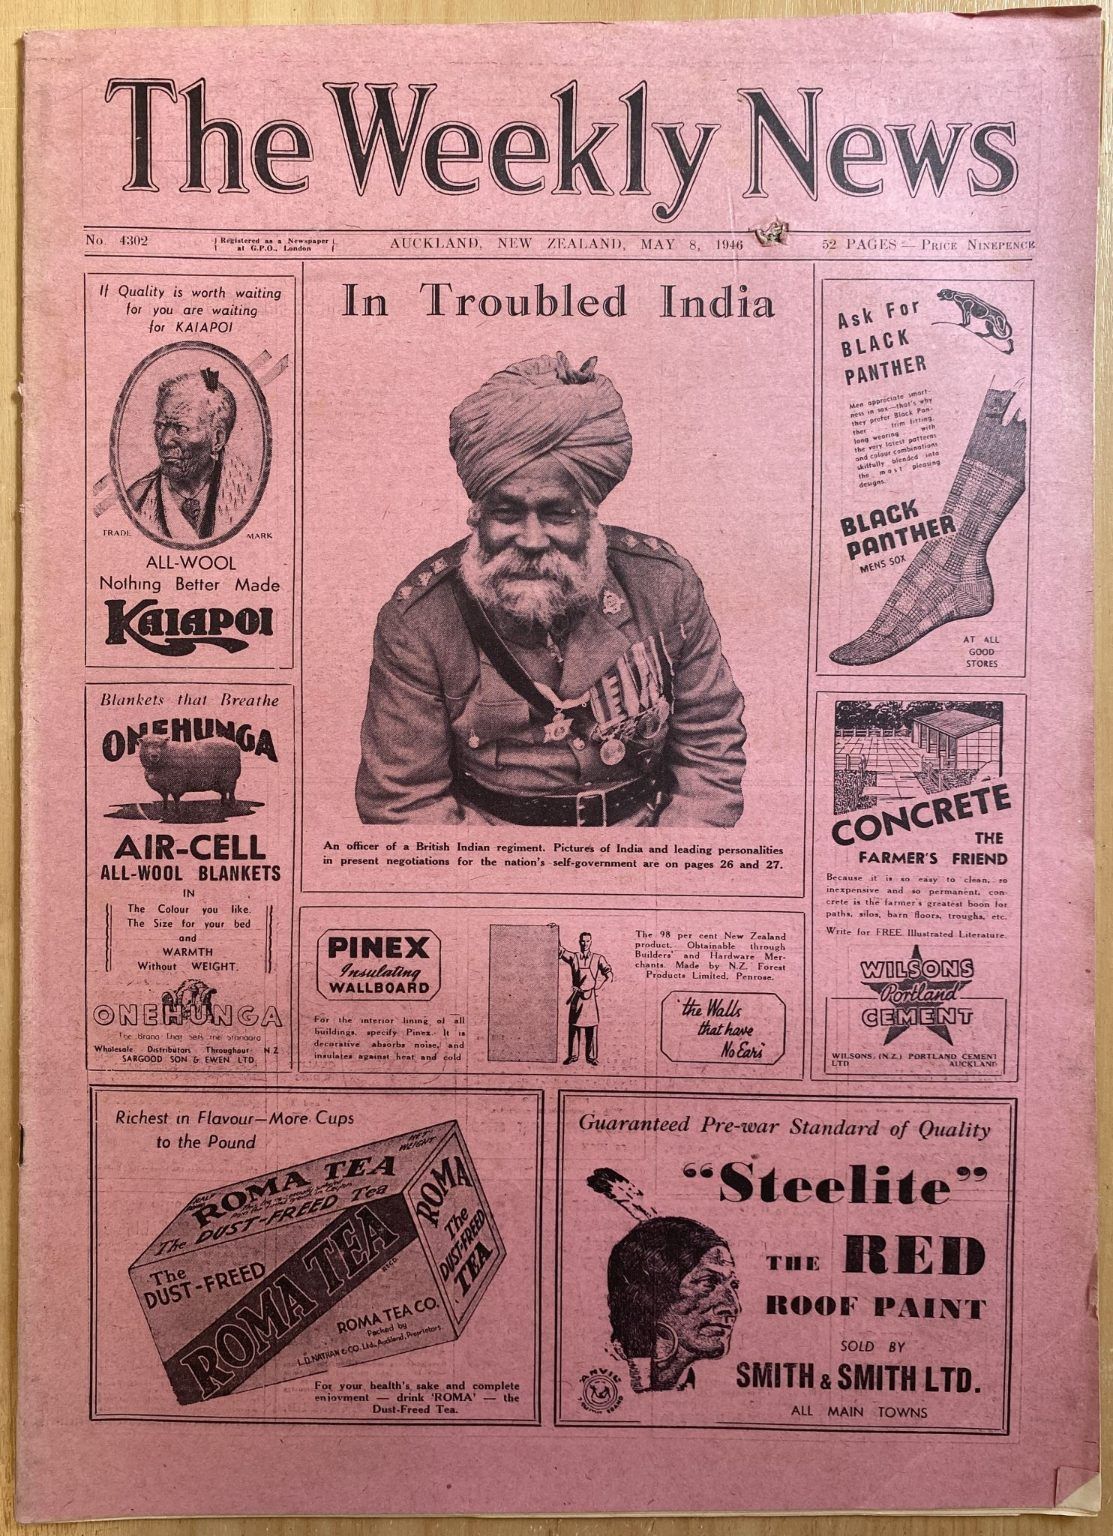 OLD NEWSPAPER: The Weekly News - No. 4302, 8 May 1946